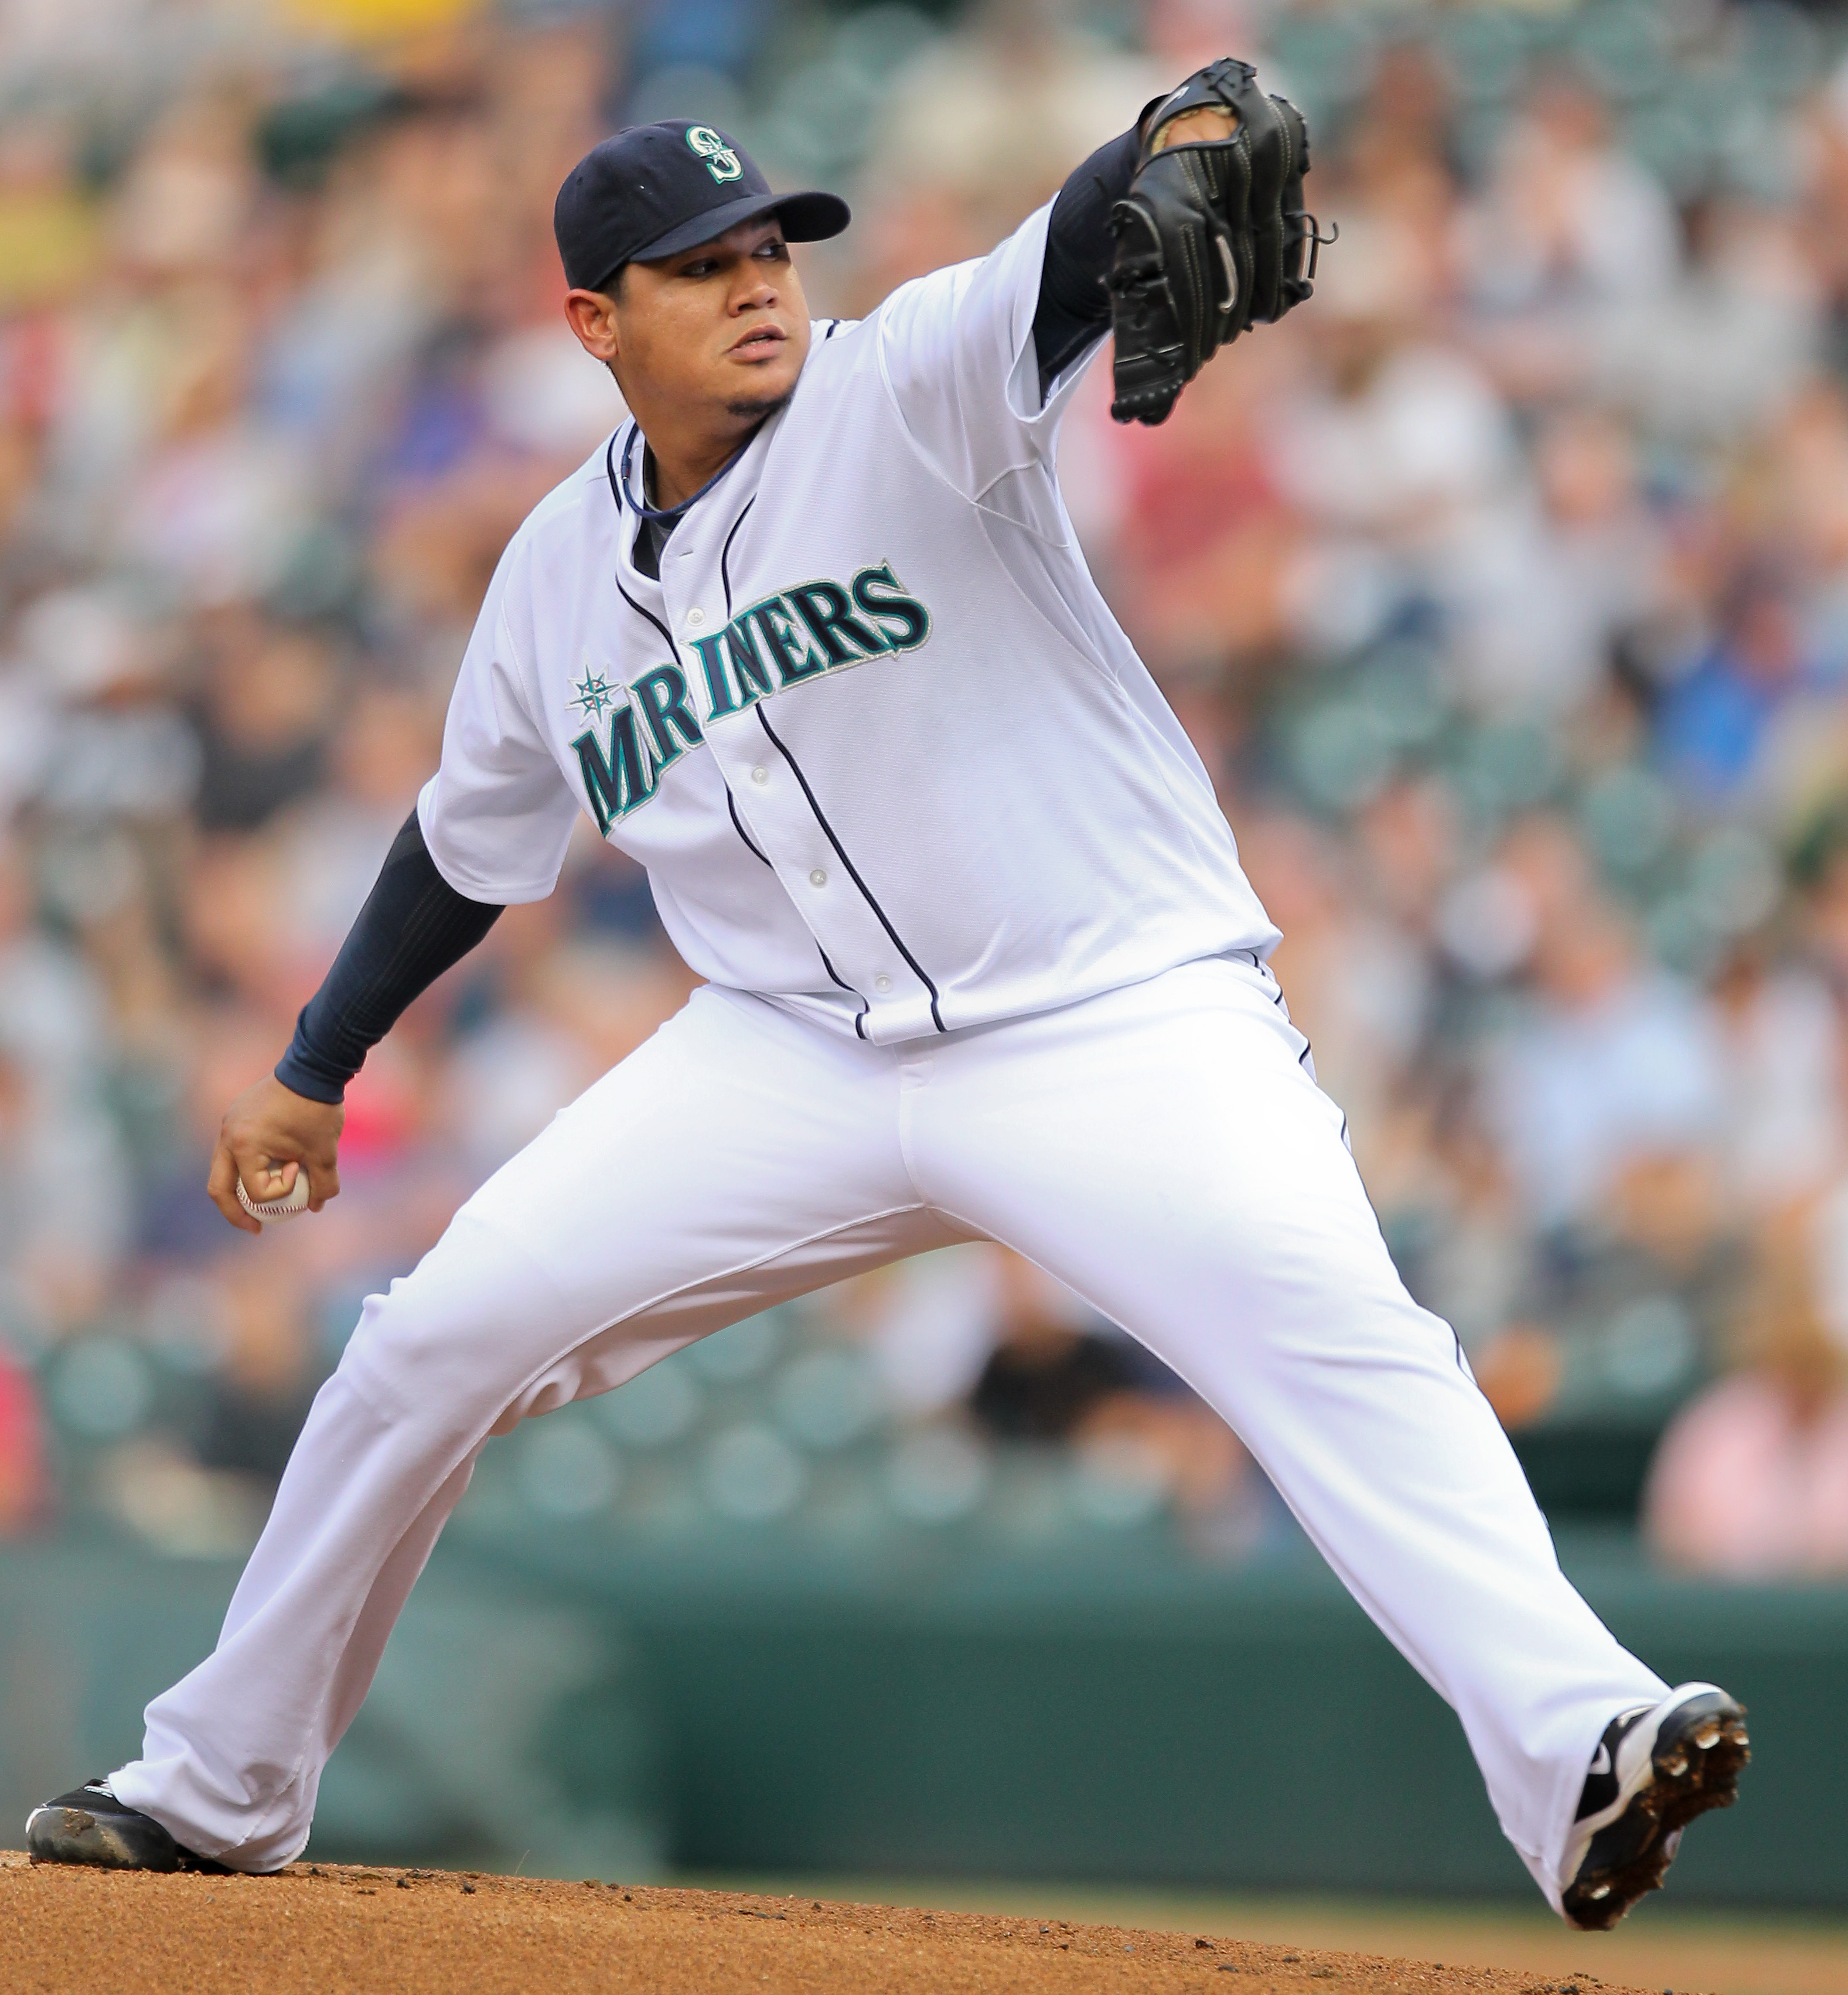 SEATTLE - AUGUST 05:  Starter Felix Hernandez #34 of the Seattle Mariners pitches against the Texas Rangers at Safeco Field on August 5, 2010 in Seattle, Washington. (Photo by Otto Greule Jr/Getty Images)